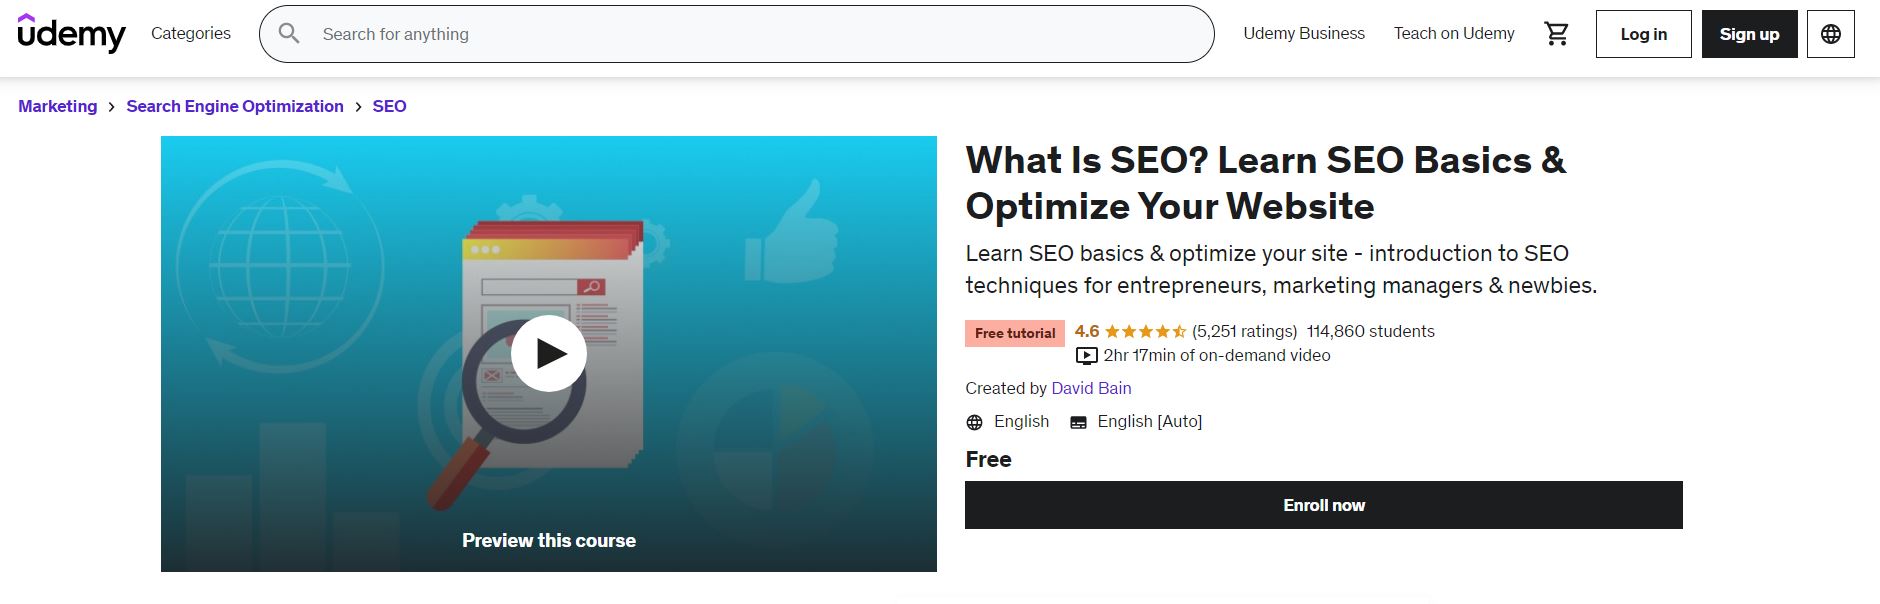 Free Online SEO Courses| Udemy.